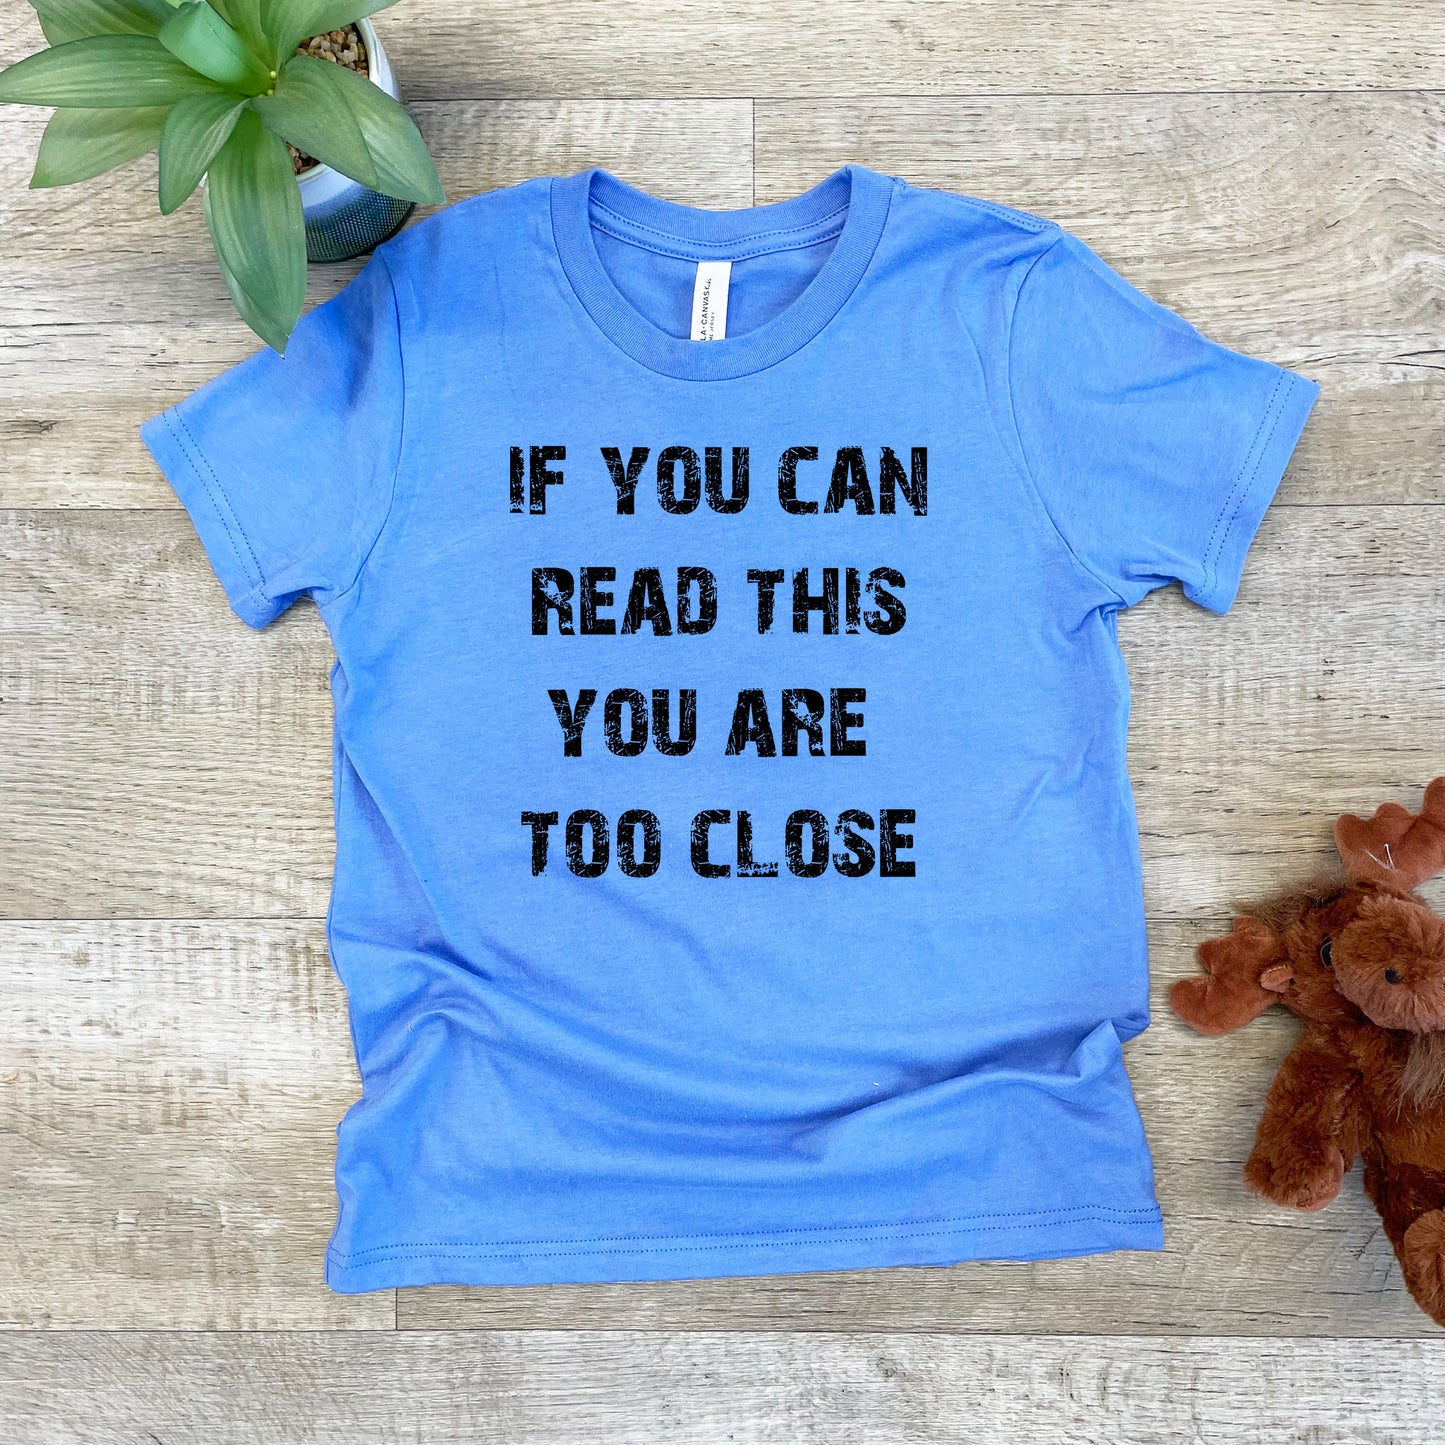 If You Can Read This You Are Too Close - Kid's Tee - Columbia Blue or Lavender